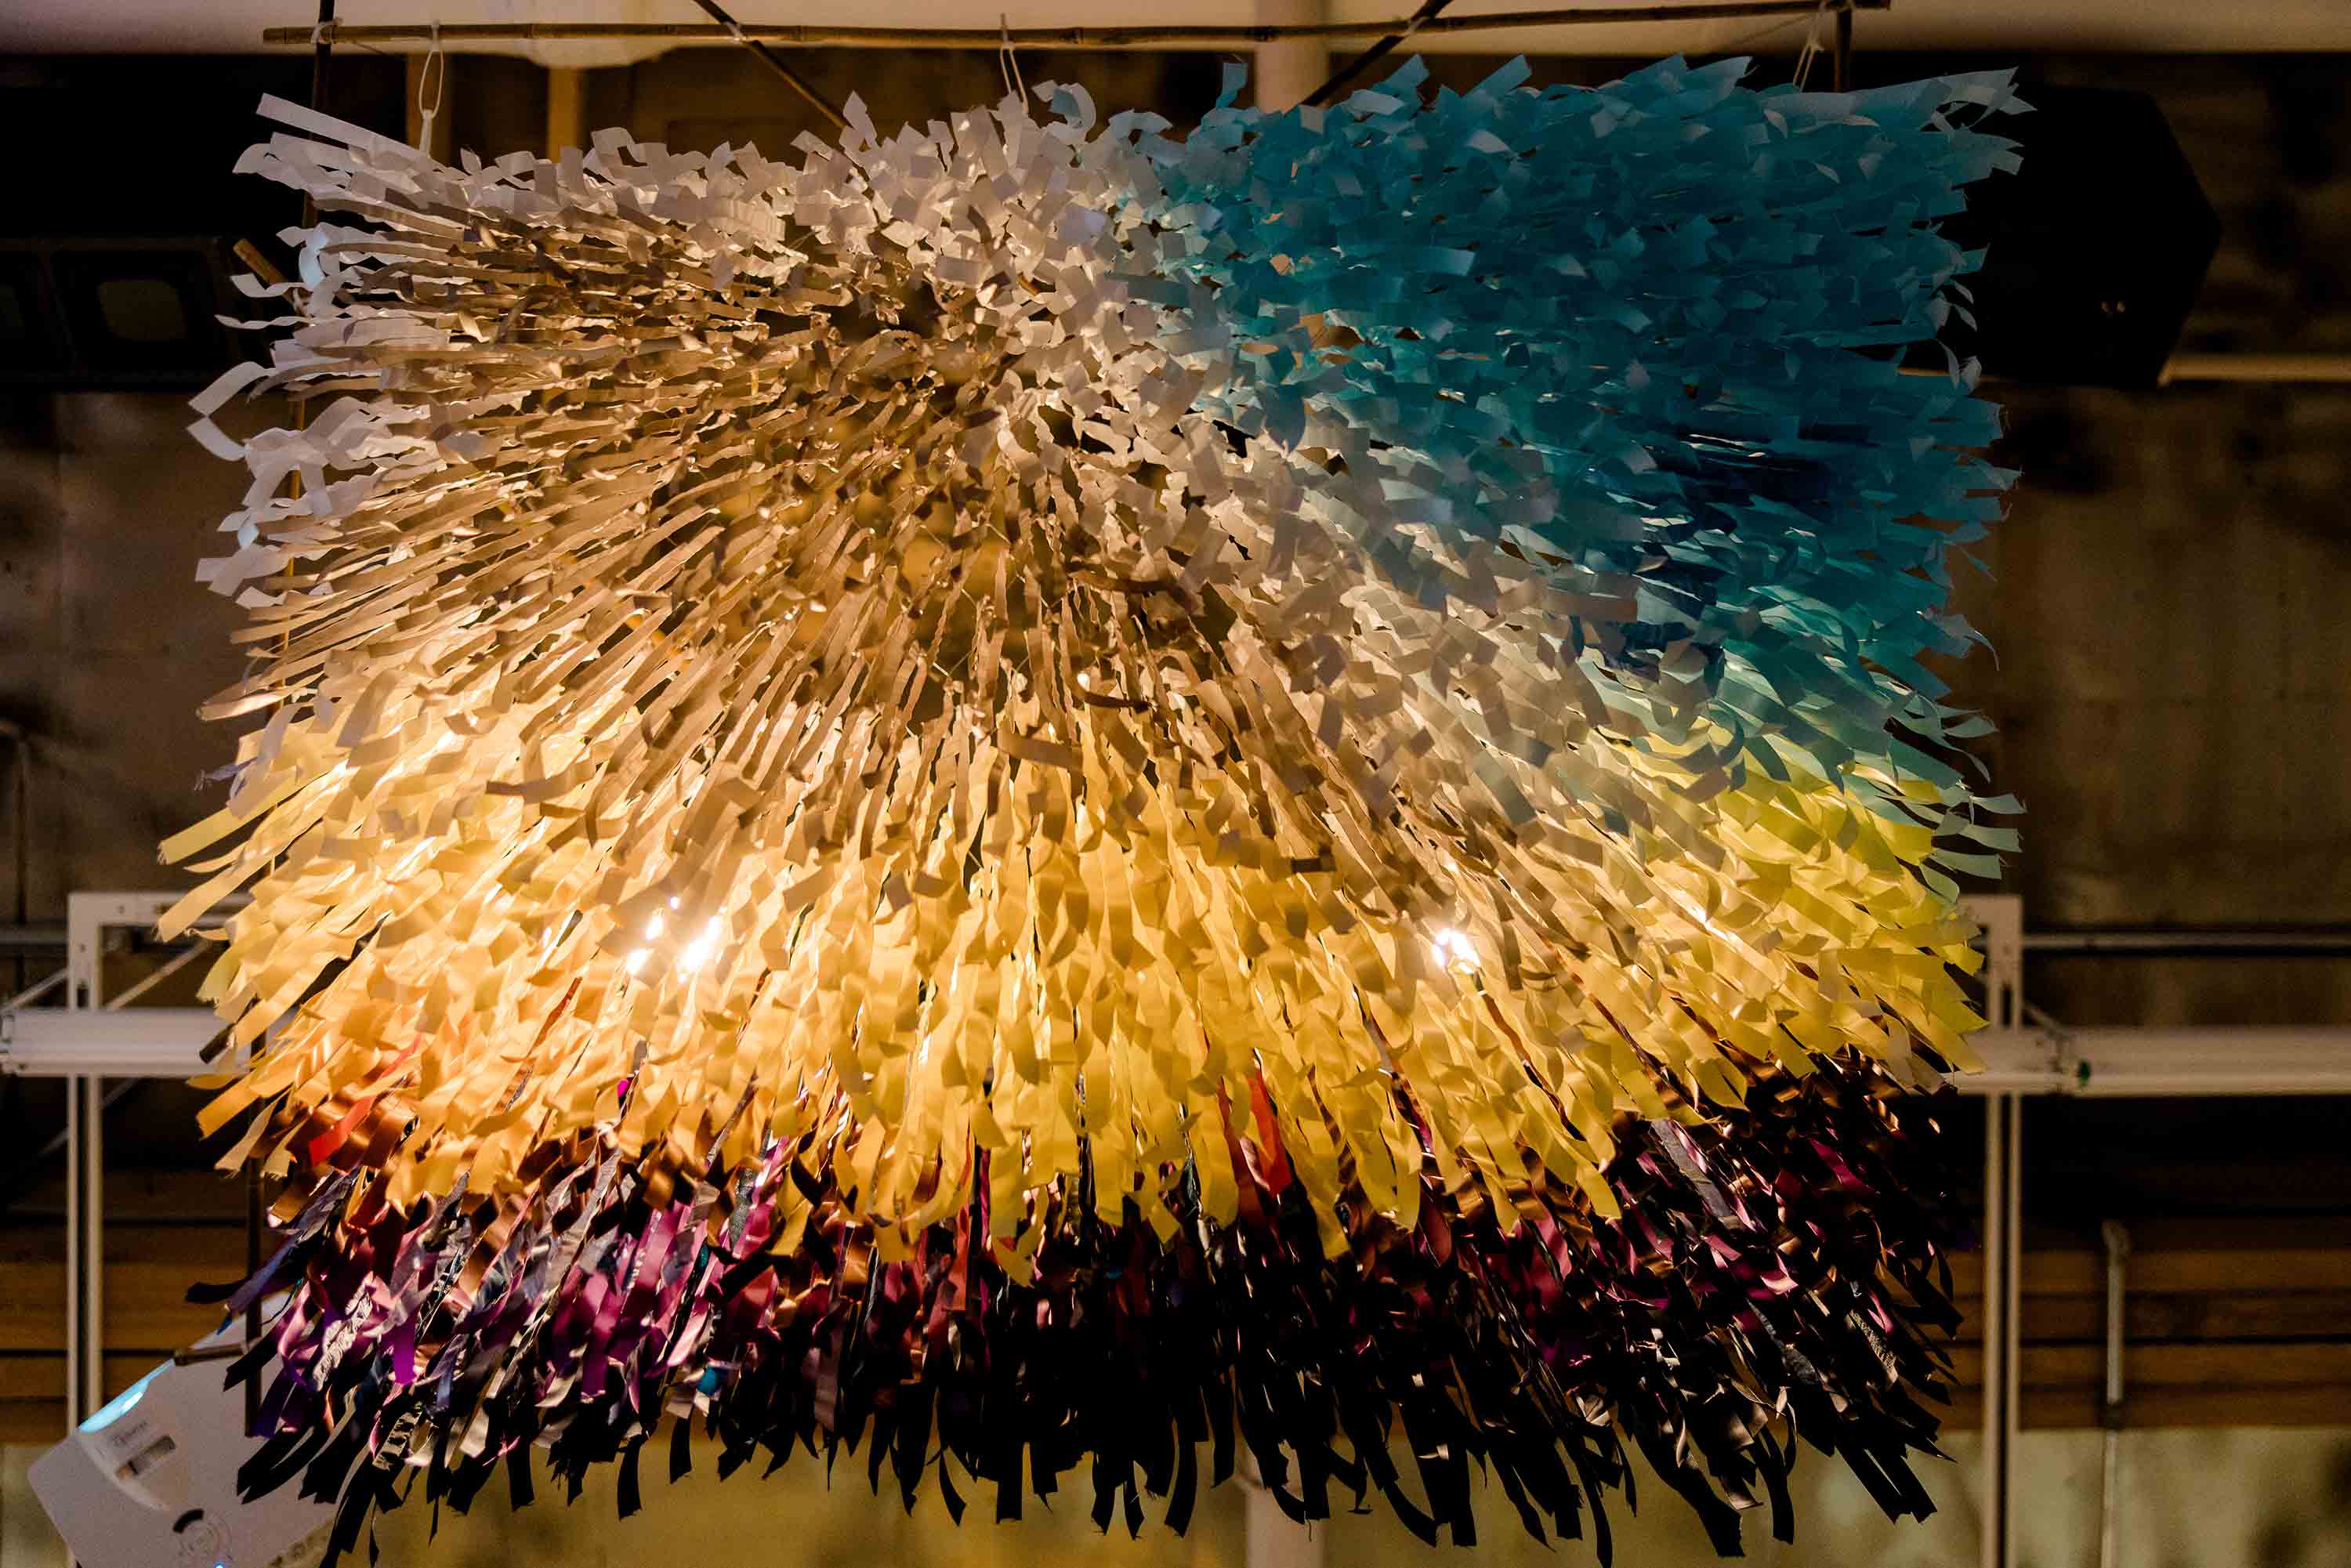 Hundreds of colourful strips of paper hanging from a light fixture.